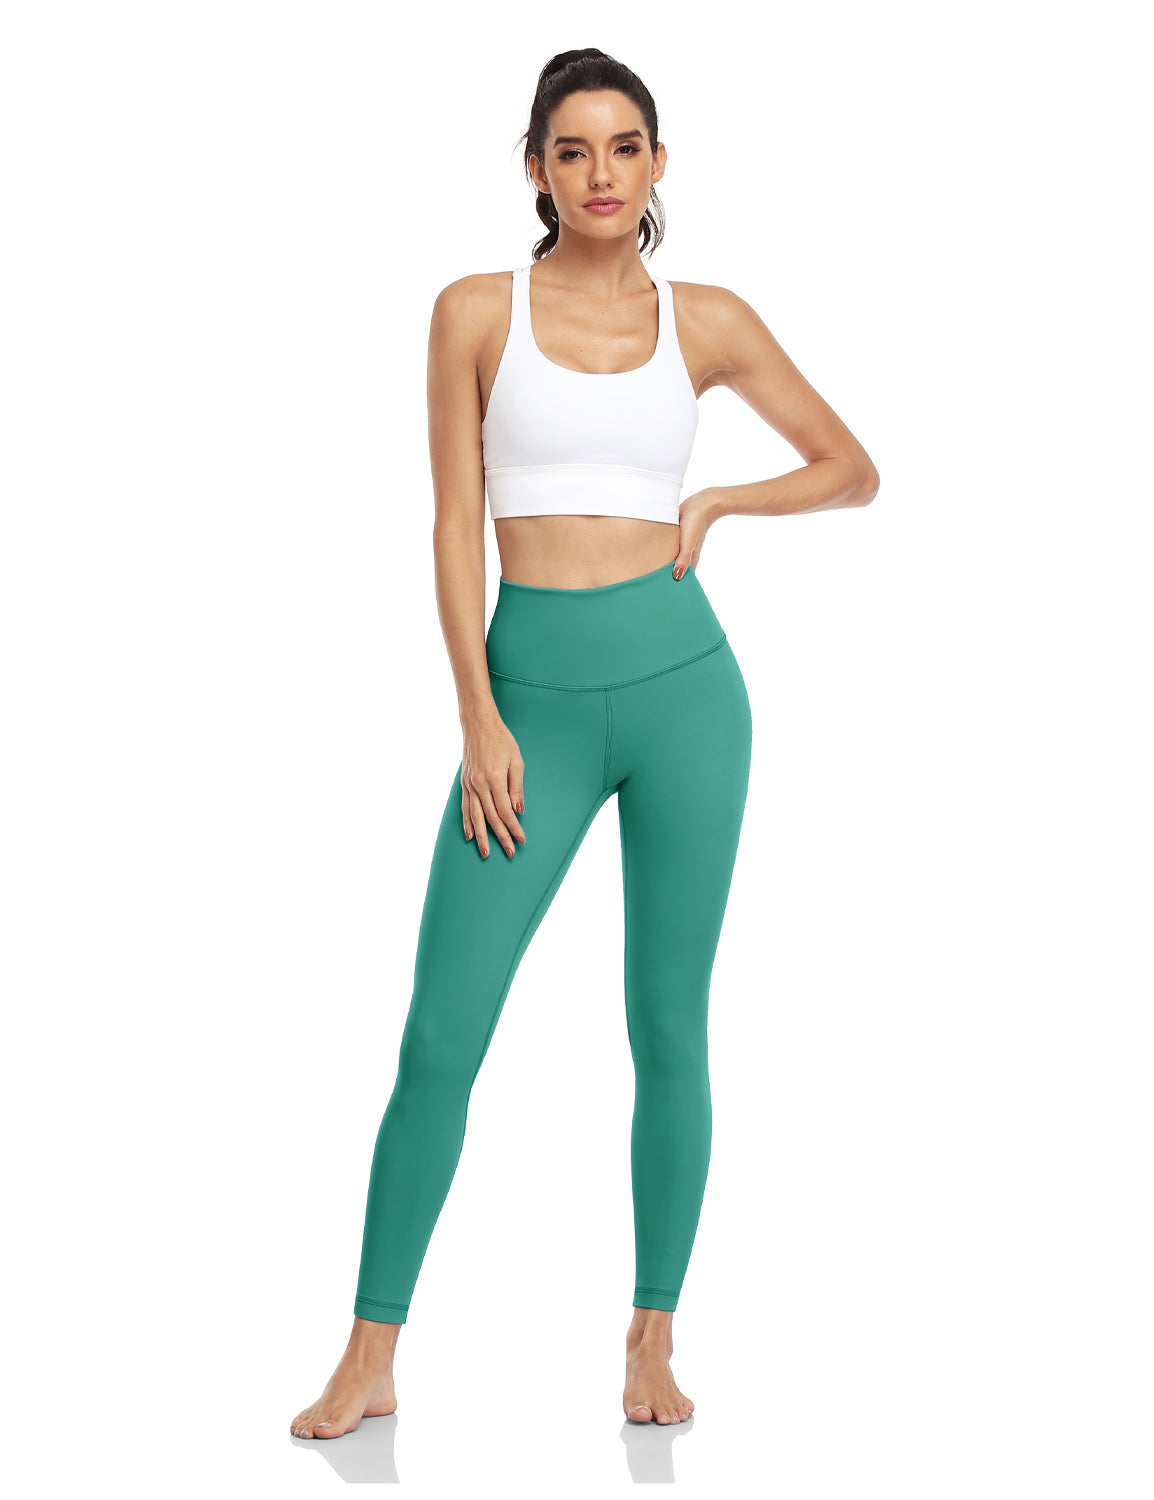 HeyNuts Essential 7/8 Leggings, Buttery Soft Pants Hawthorn Athletic Yoga  Pants 25'', Dazzling Blue, M : Buy Online at Best Price in KSA - Souq is  now : Fashion